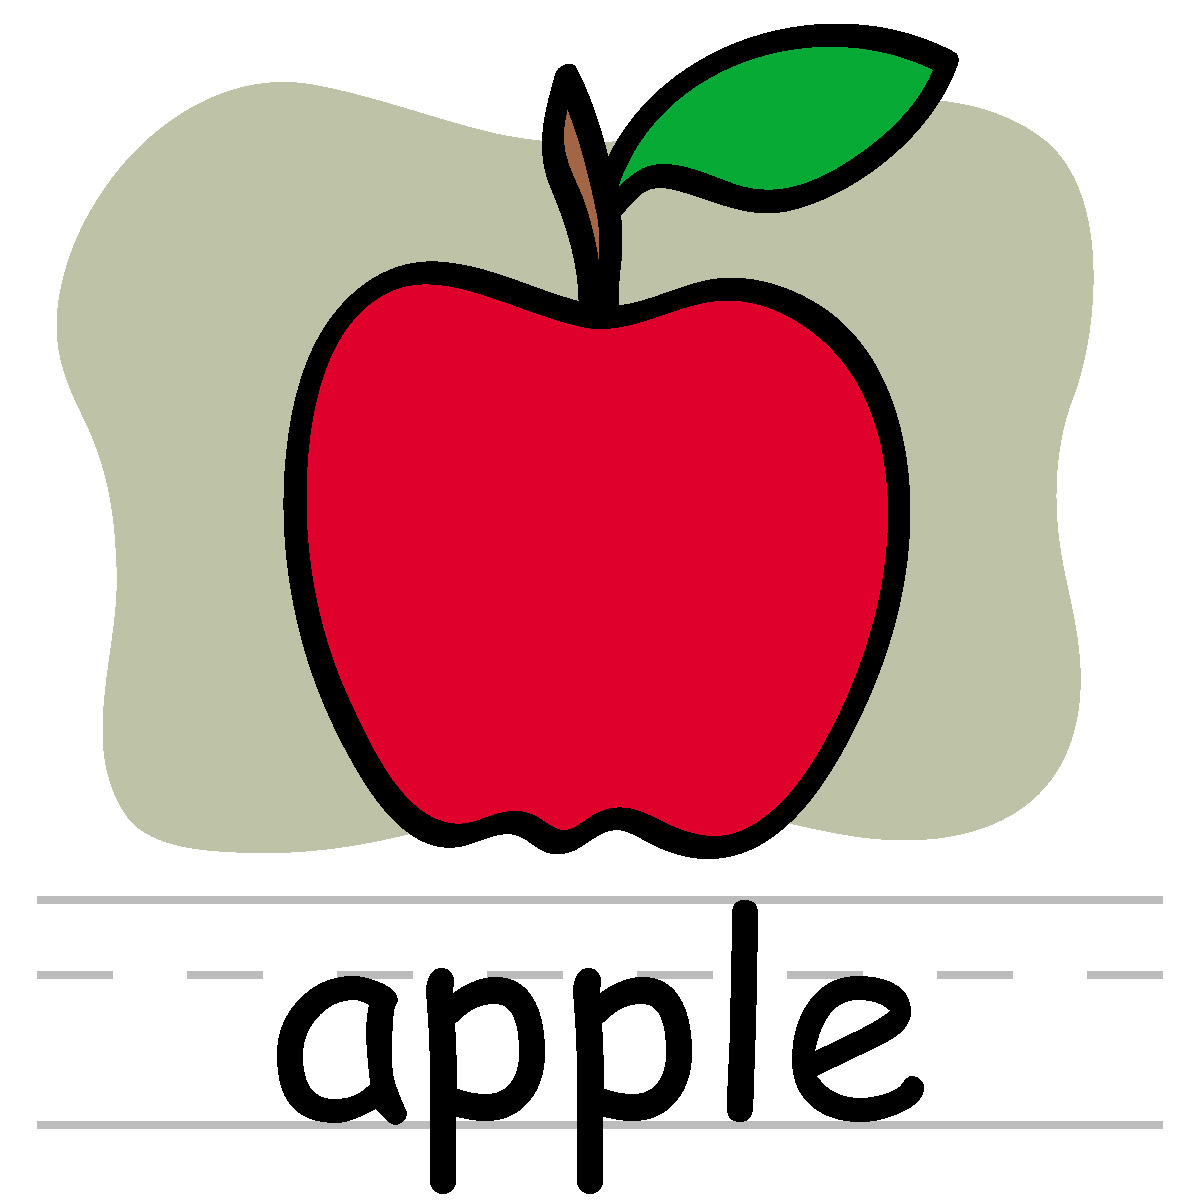 Apples clipart clip art. In panda free images